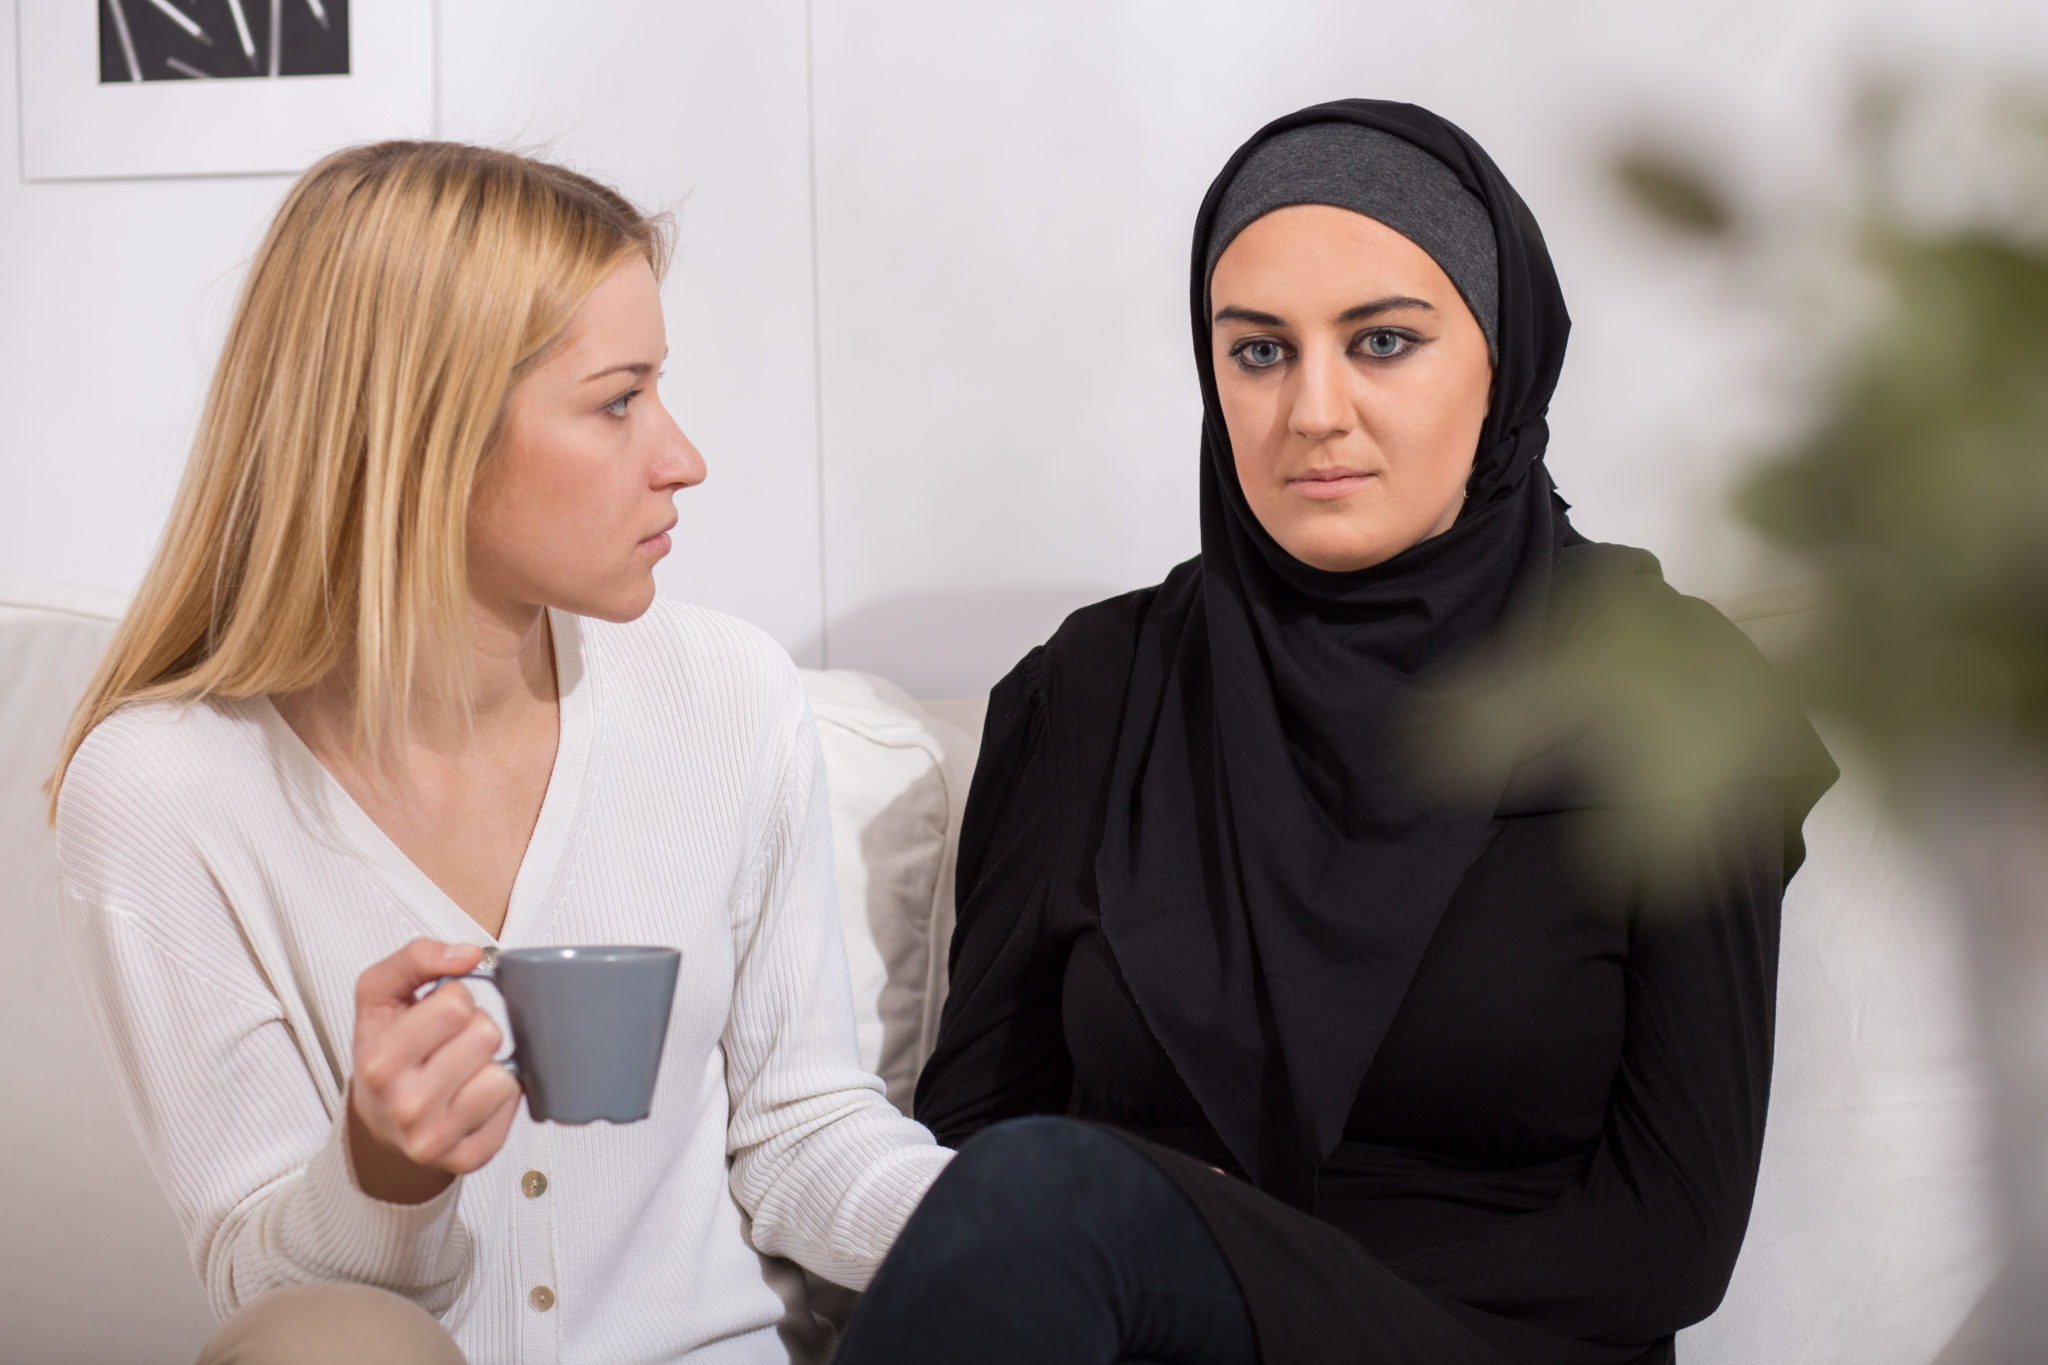 Scared blond woman and her worried muslim friend 2048 x 1365